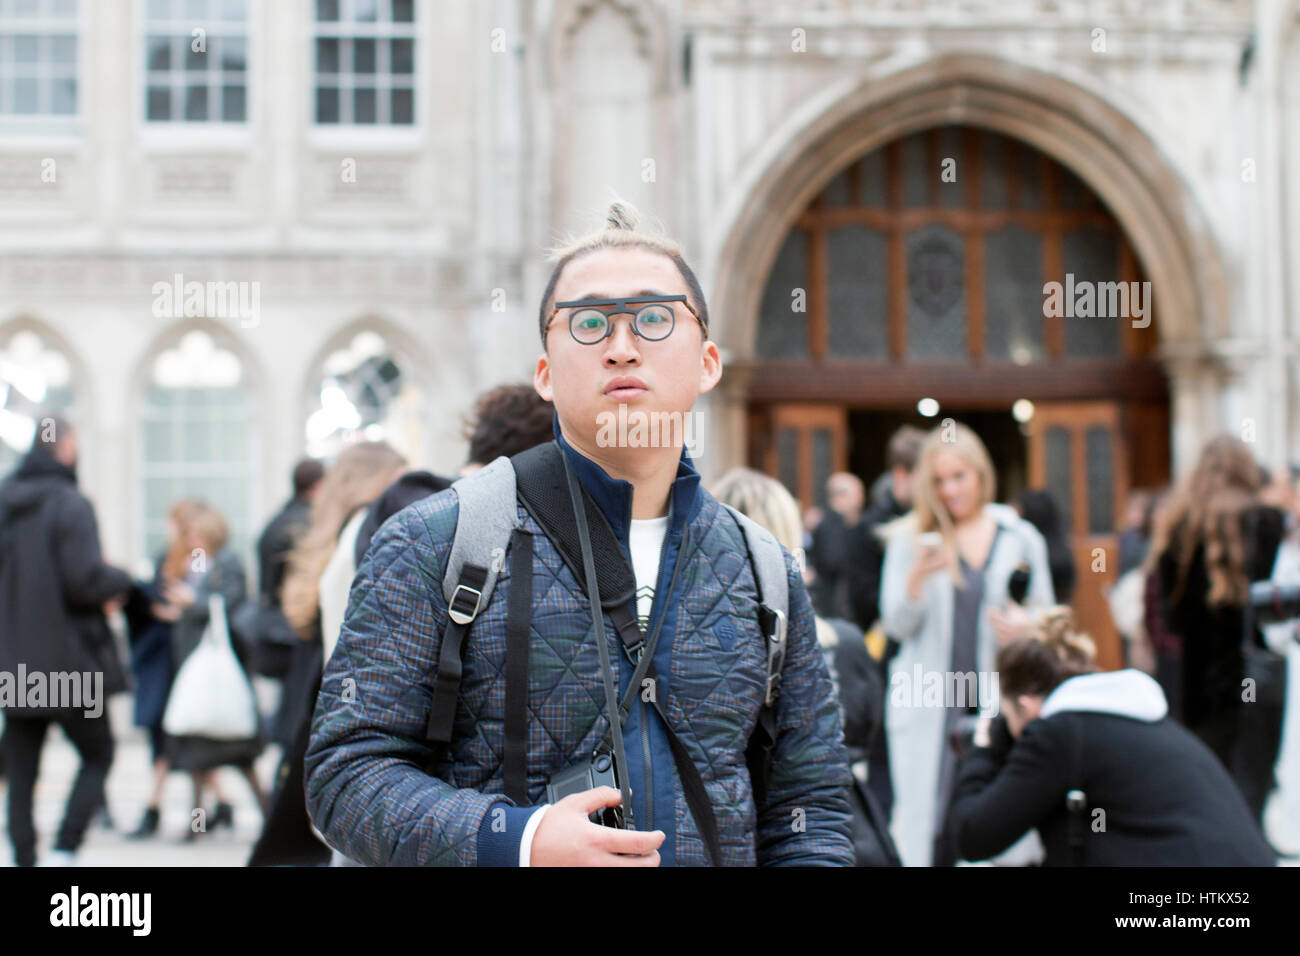 Man with glasses at London Fashion Week Stock Photo